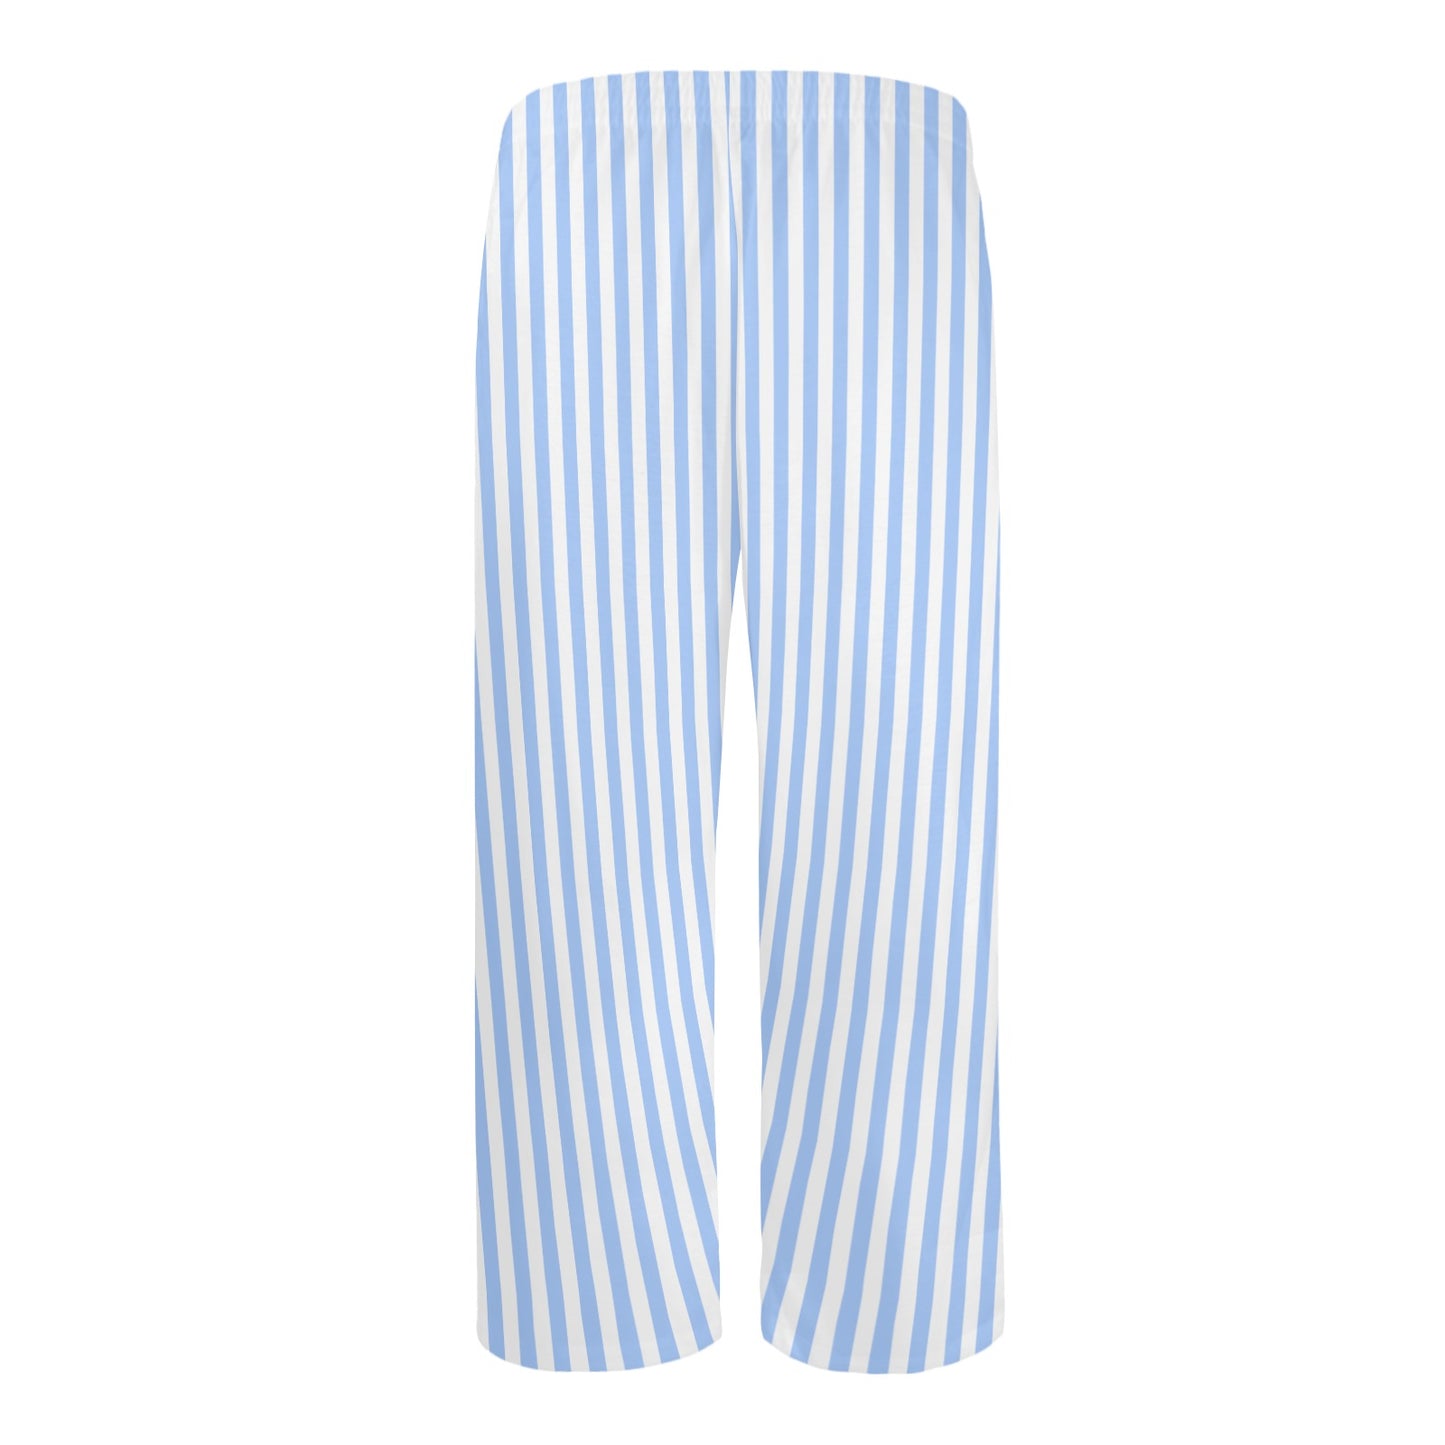 Blue and White Striped Men Pajamas Pants, Stripes Satin PJ Pockets Sleep Trousers Couples Matching Guys Male Adult Trousers Bottoms